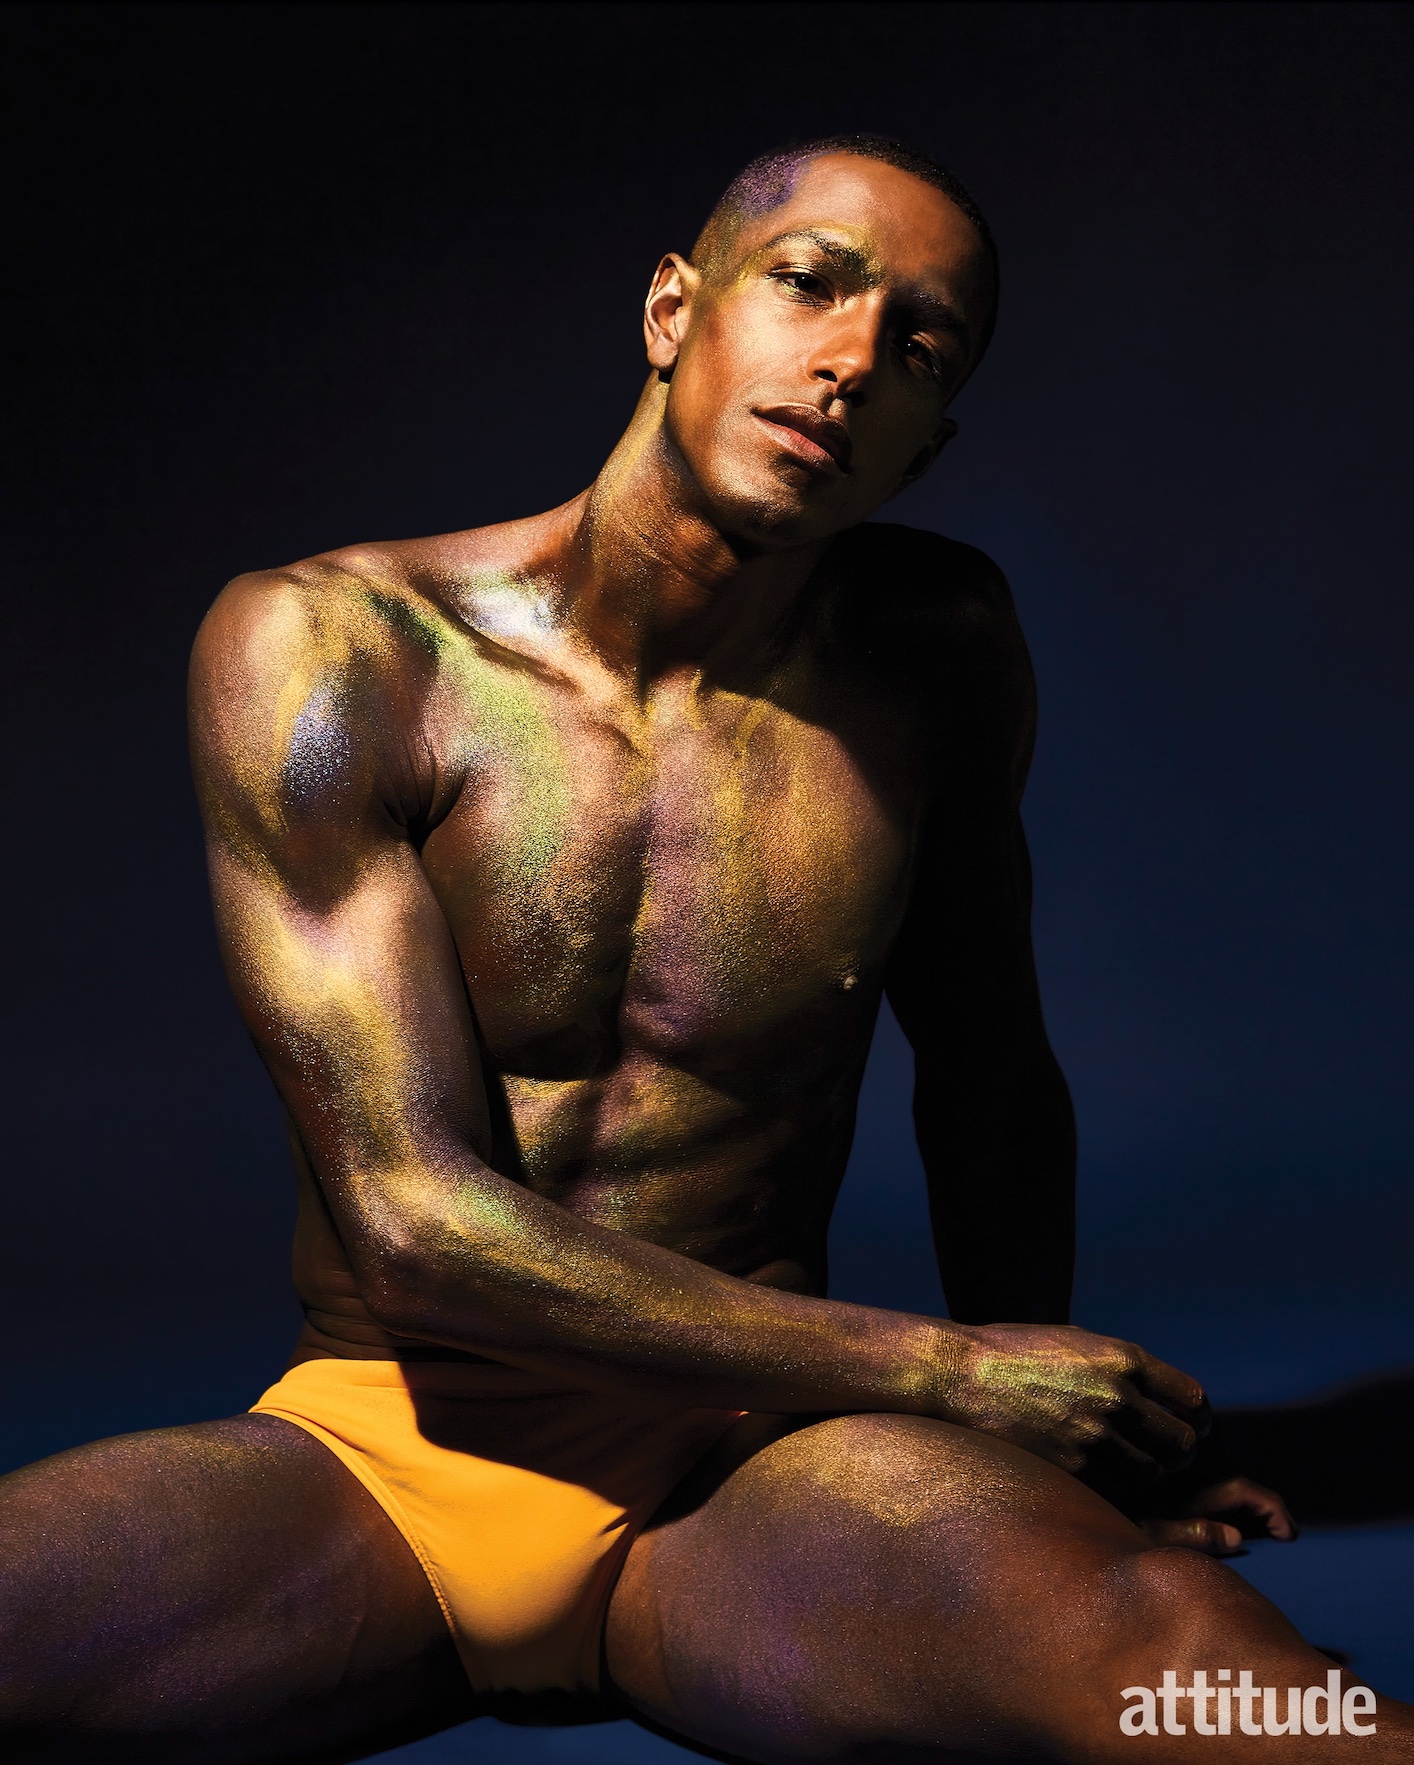 A man wearing yellow swimming trunks with golden shimmering body paint